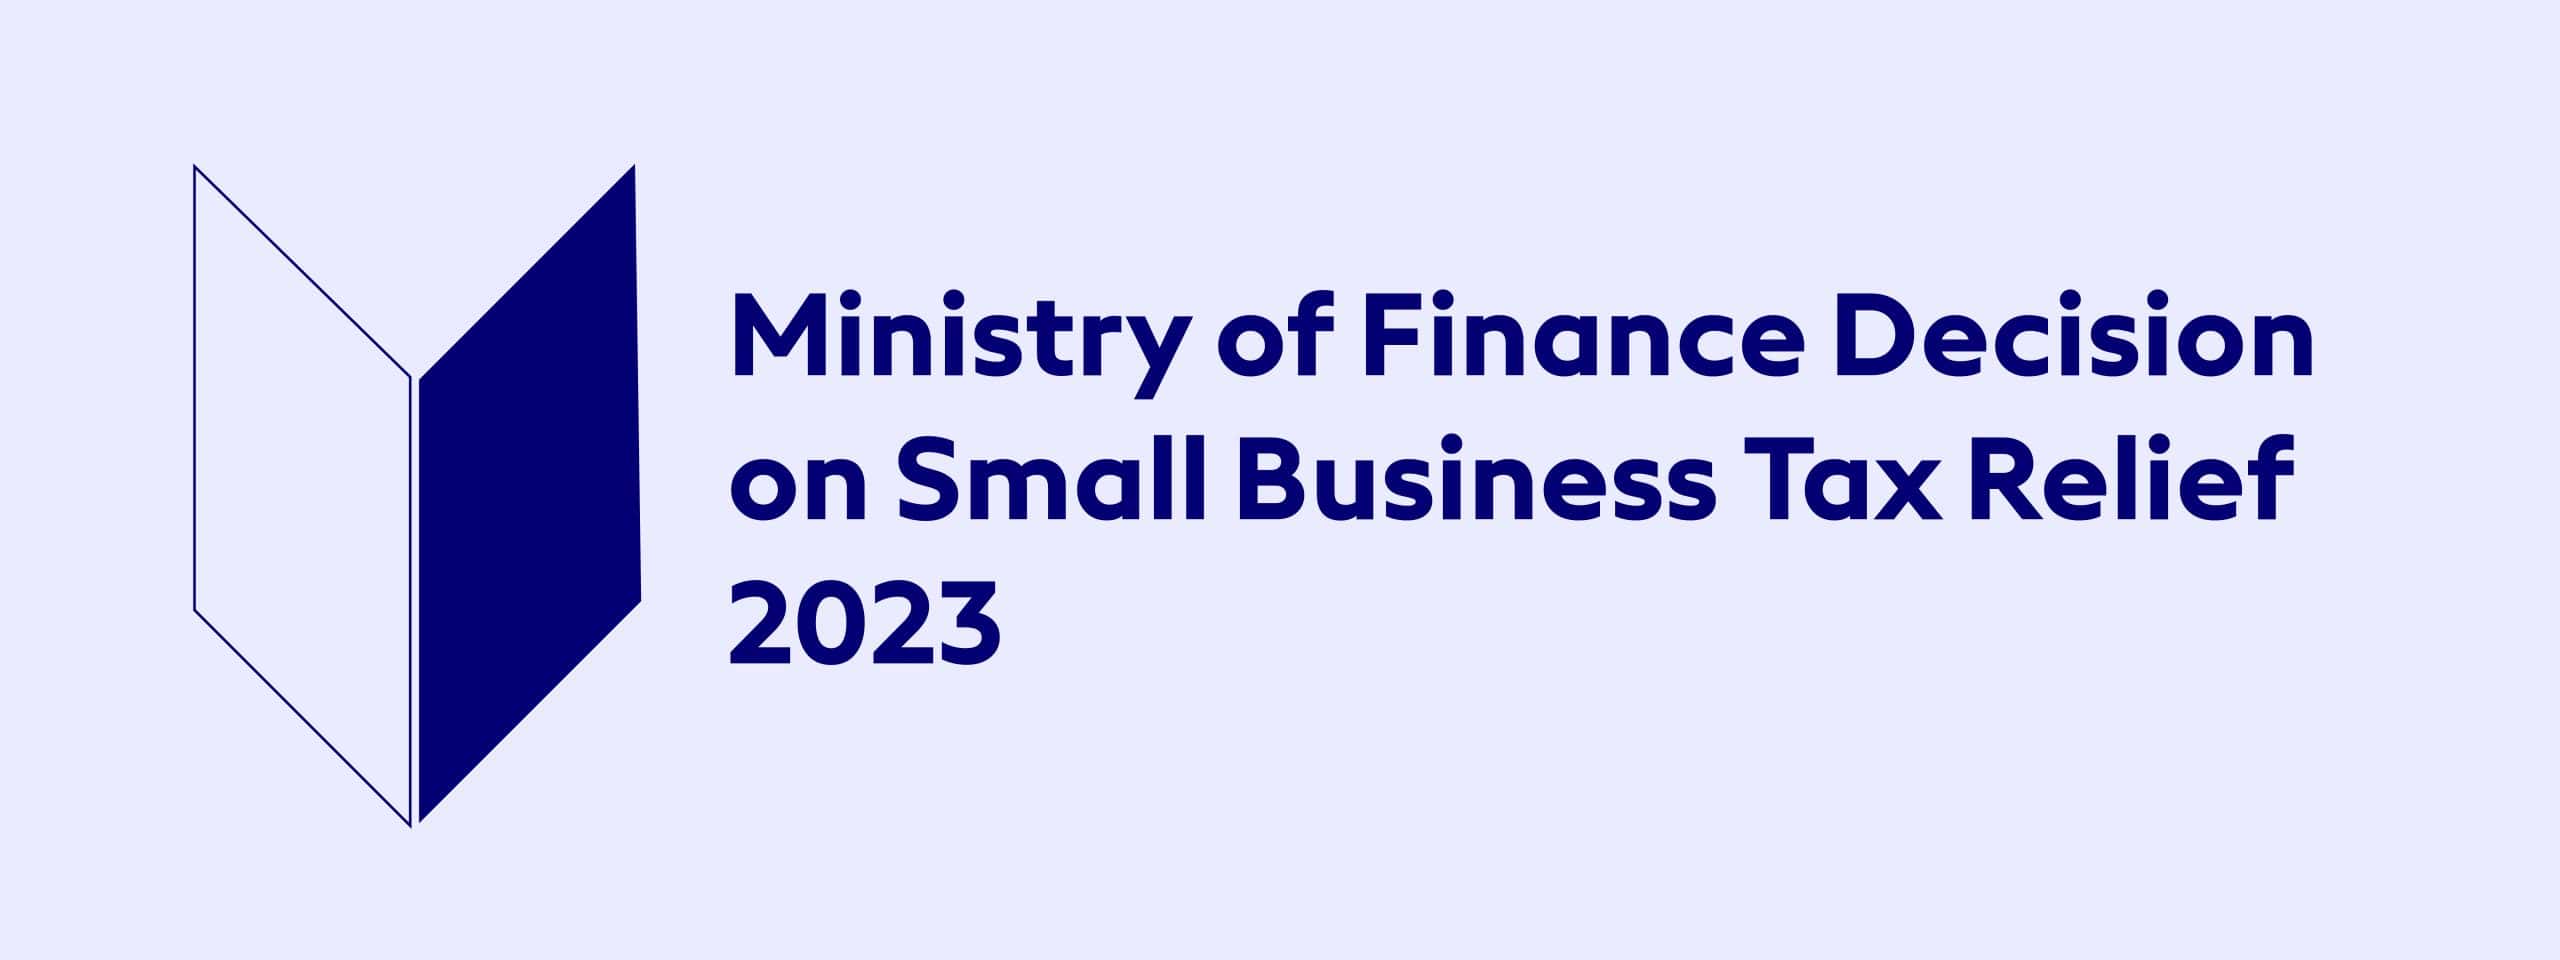 Ministry of Finance Decision on Small Business Tax Relief 2023